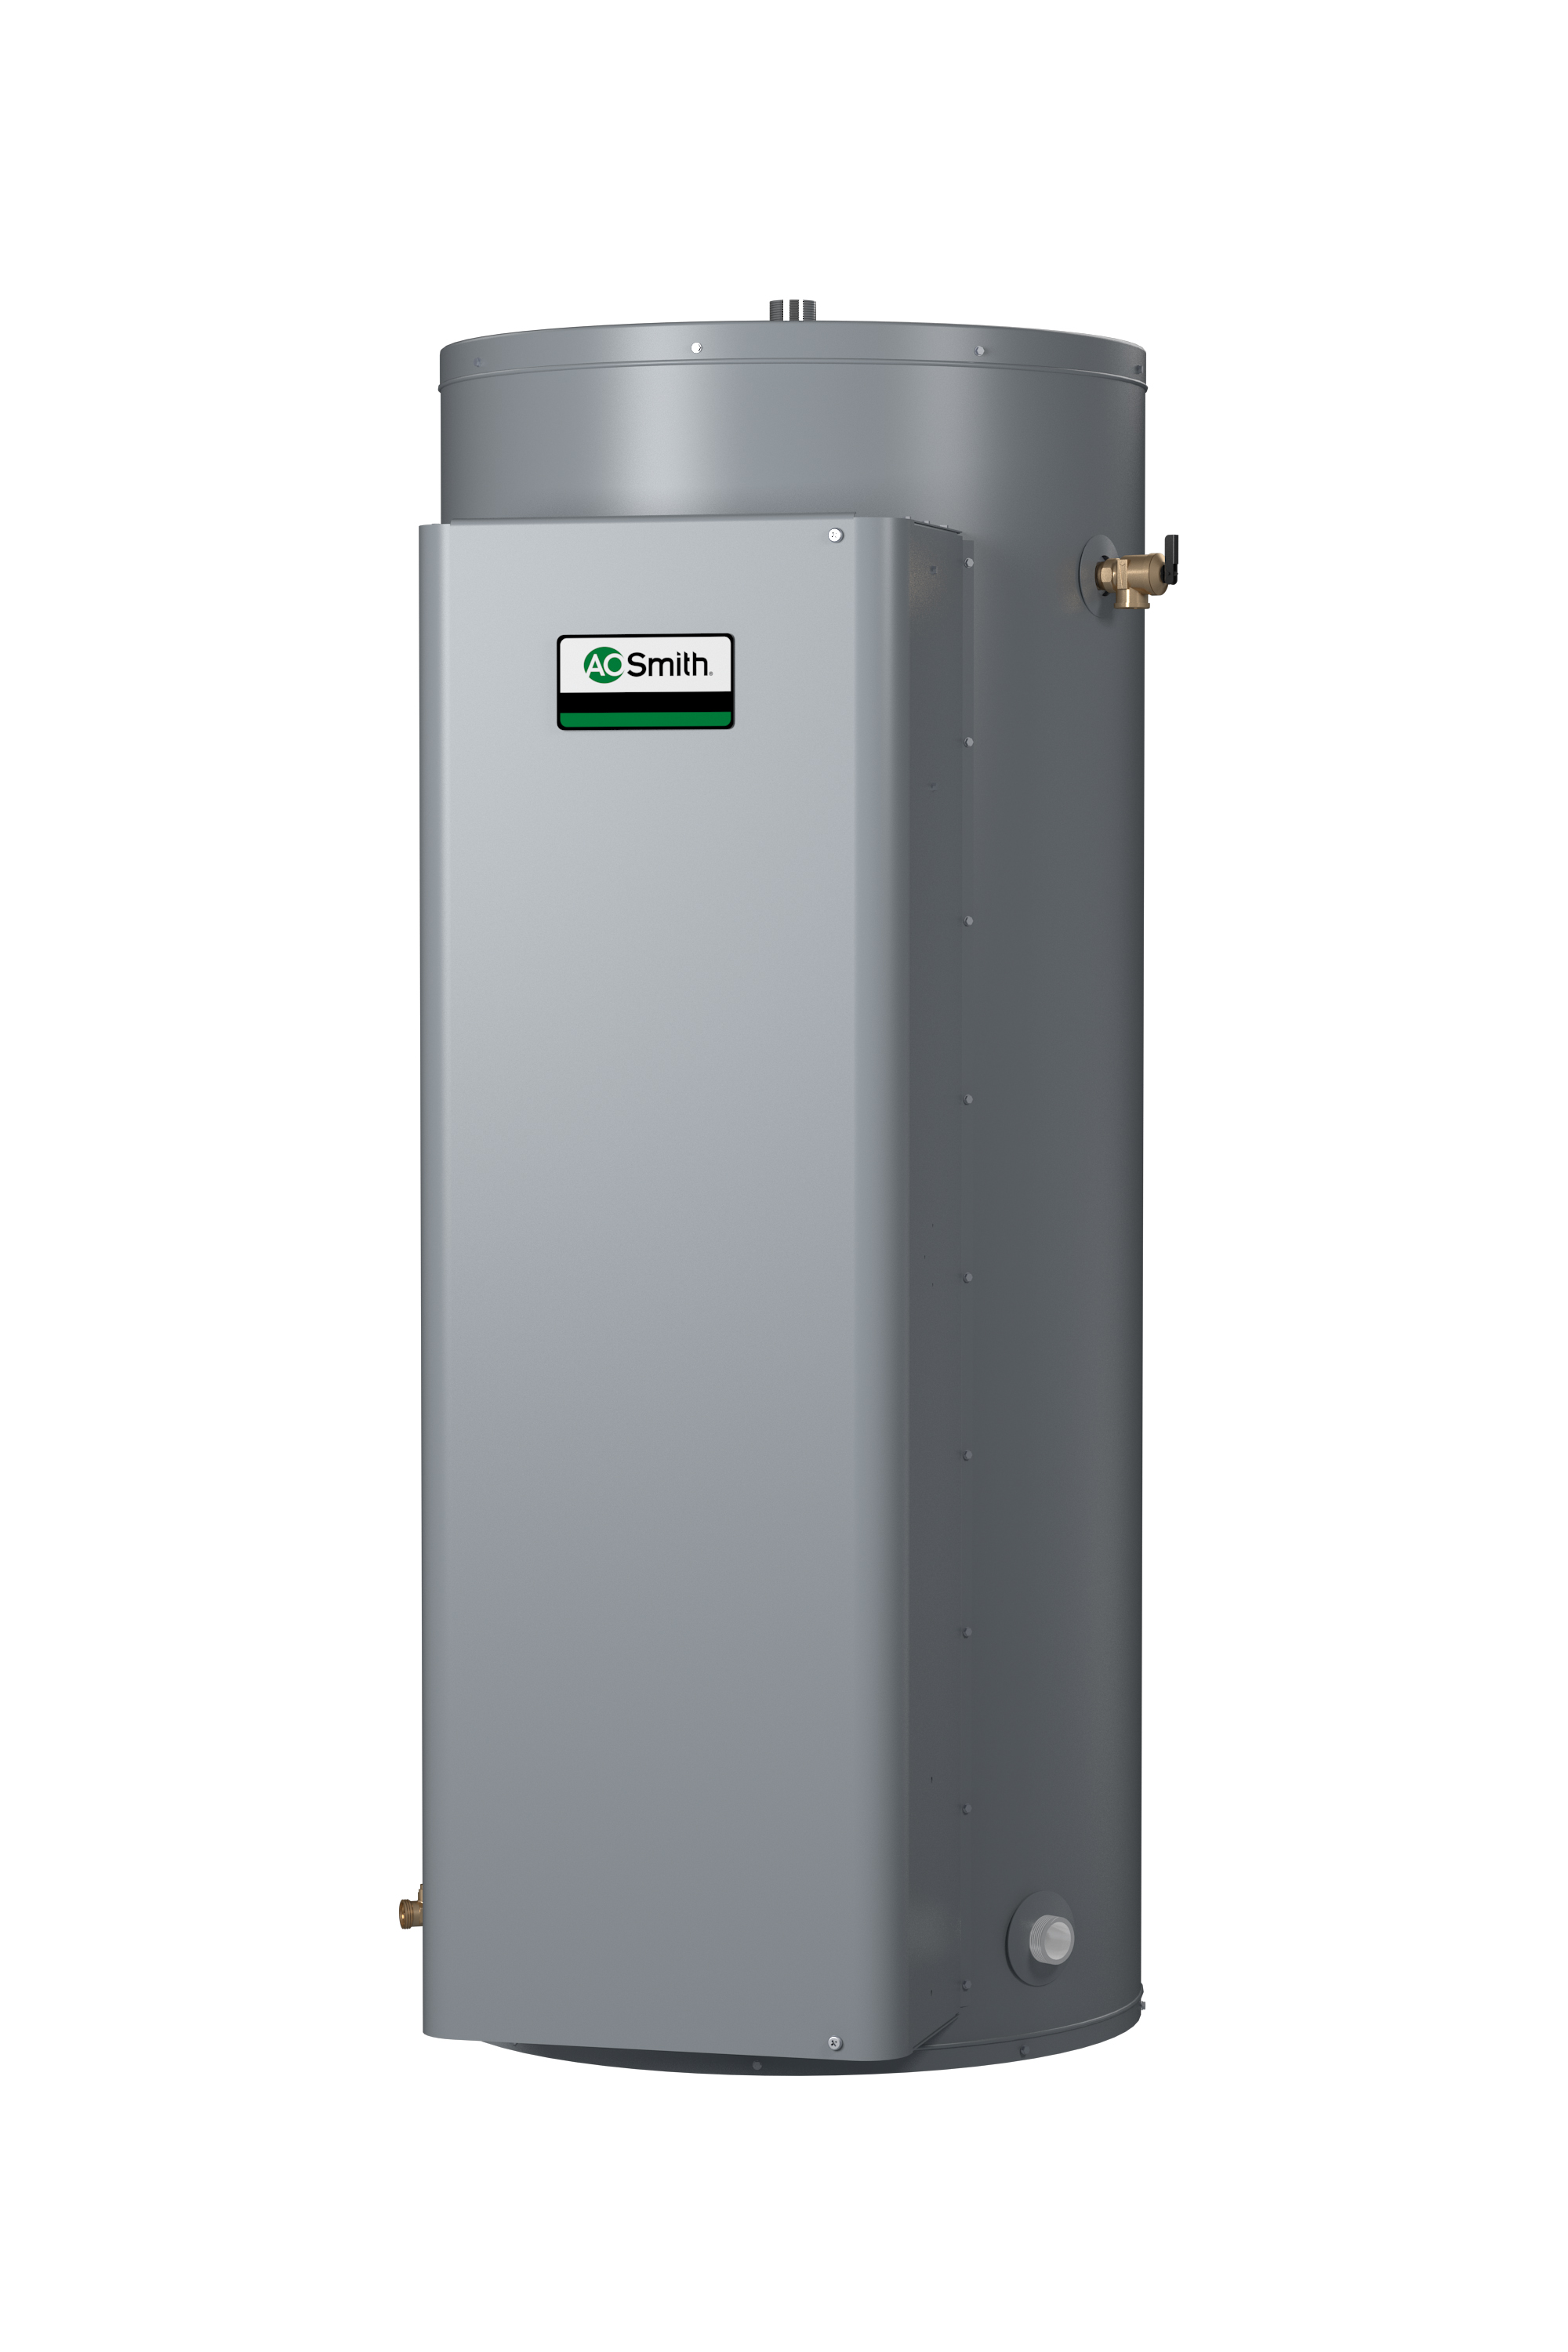 AO SMITH DVE-120-13.5, 119 GALLONS, 13.5KW, 277 VOLT, 48.73 AMPS, 1 PHASE, 3 ELEMENT, GOLD Xi SERIES HEAVY DUTY COMMERCIAL ELECTRIC WATER HEATER